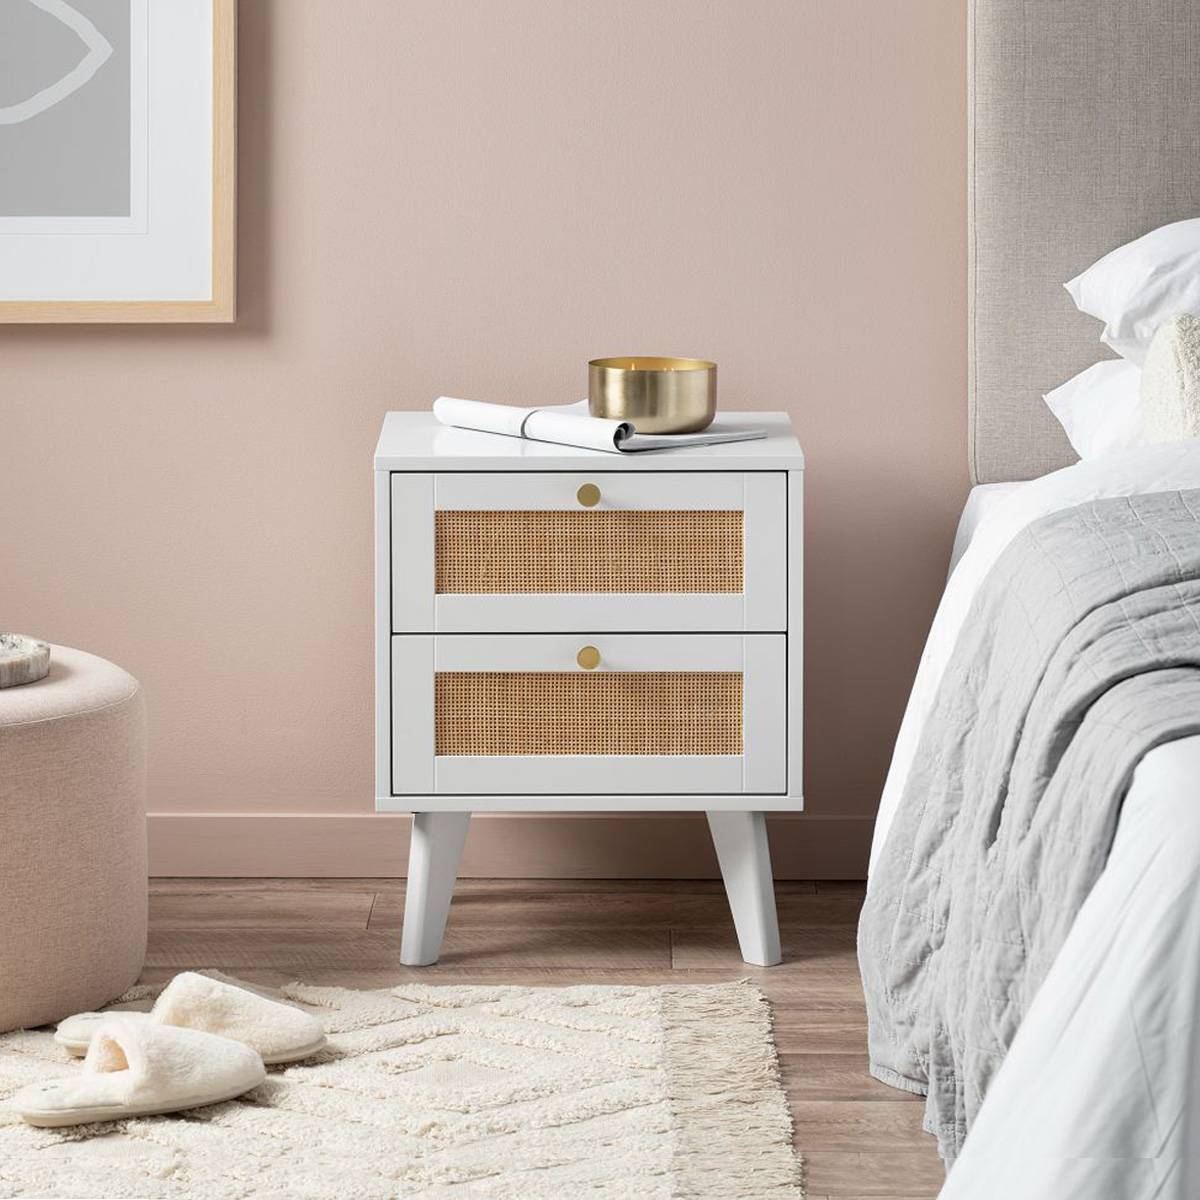 Georgia Two Drawer Bedside Table